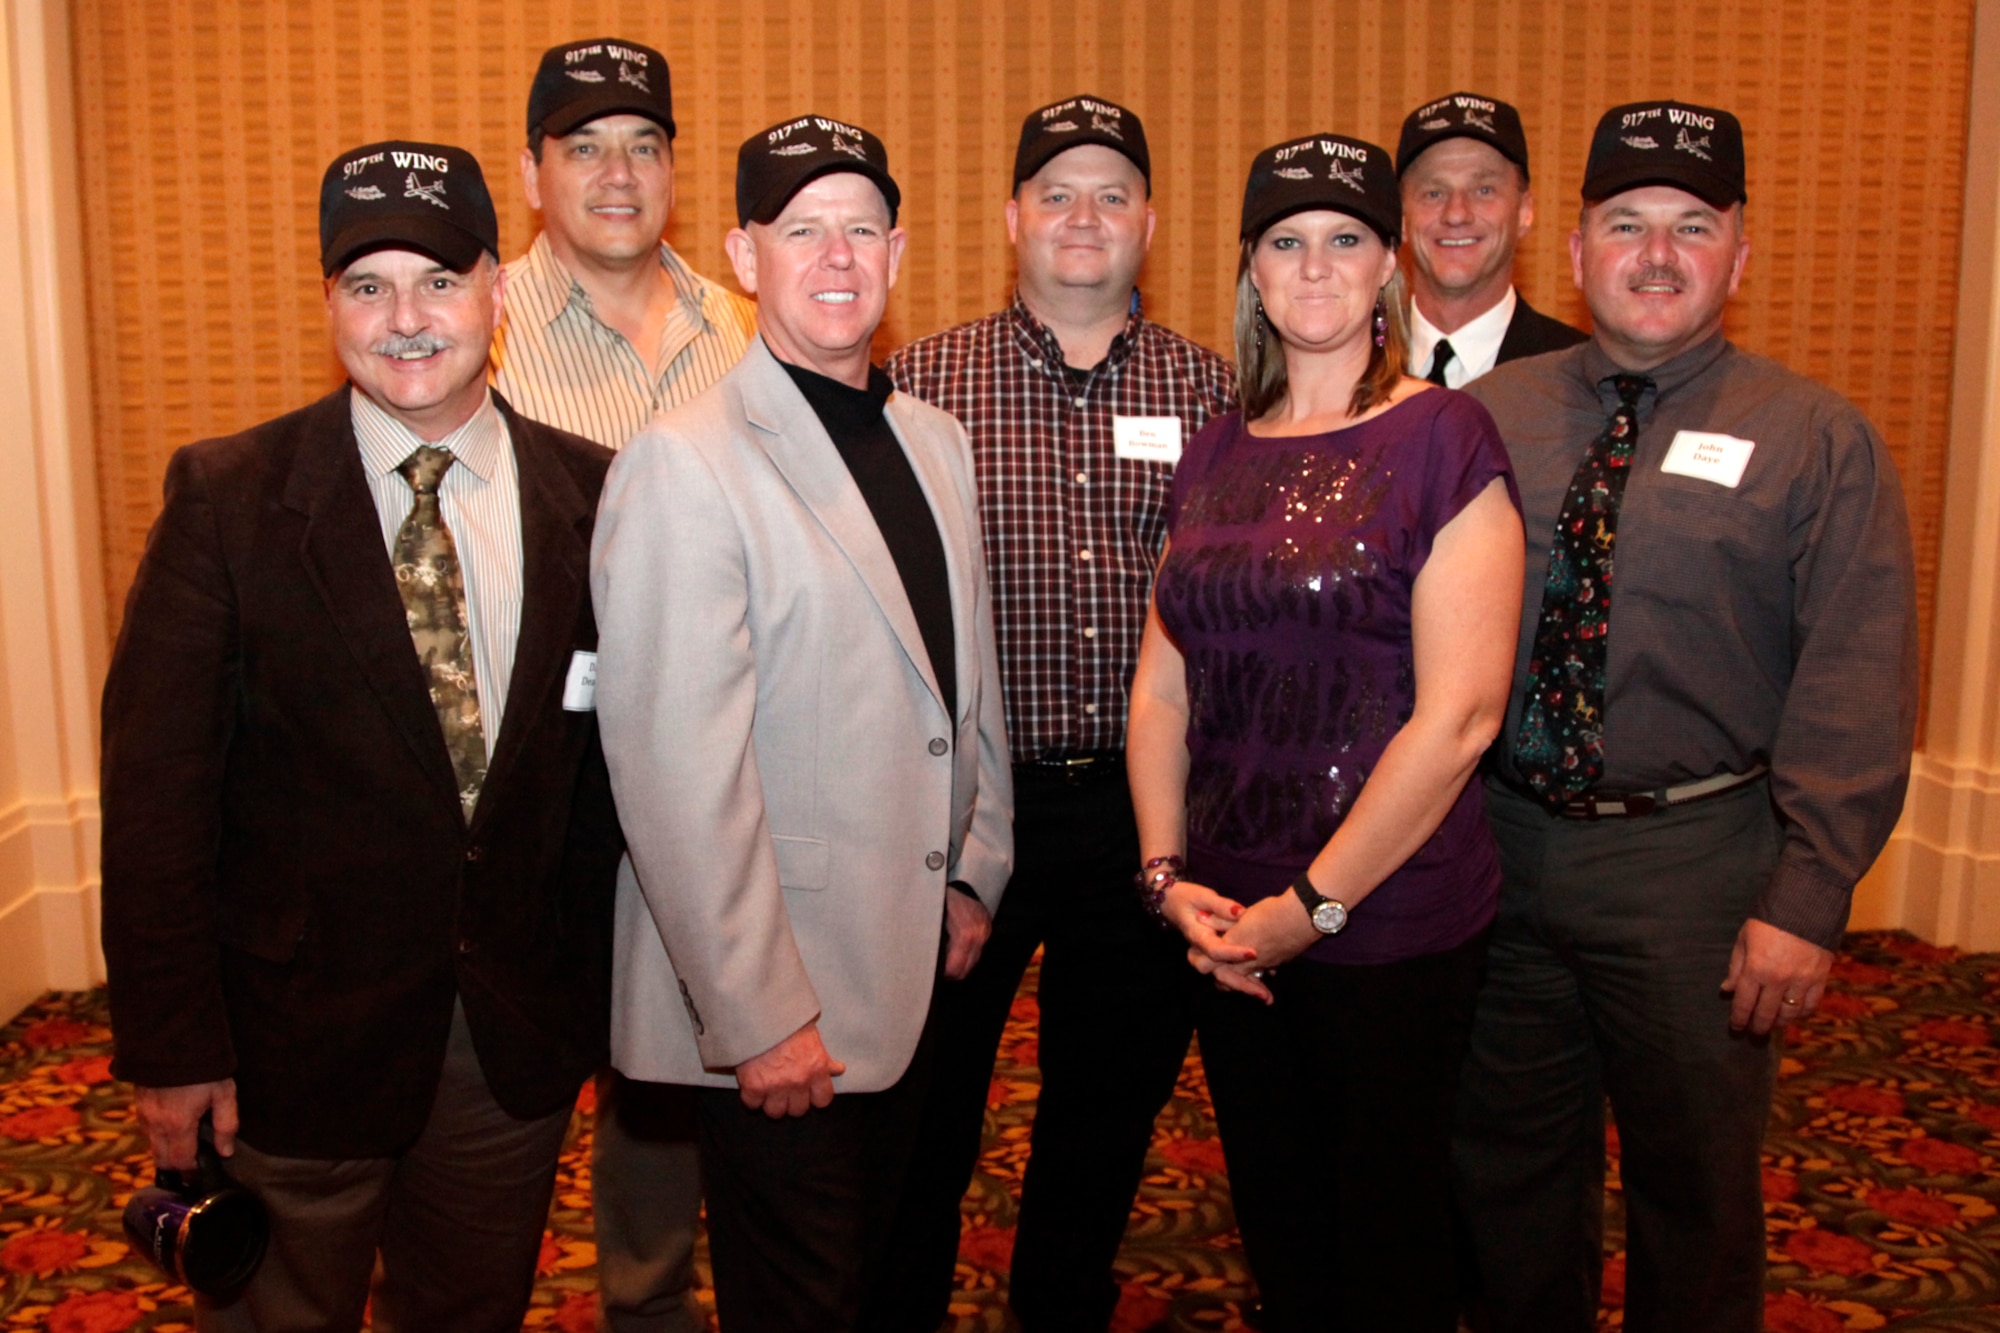 Members of the 917th Wing Safety Office at Barksdale Air Force Base, La., sport wing baseball caps in a group photo at the Wing Christmas Party at the El Dorado Hotel in Shreveport, La., Dec. 4, 2010. The bi-annual event was attended by approximately 150 people. (U.S. Air Force photo /Staff Sgt. Travis Robertson)